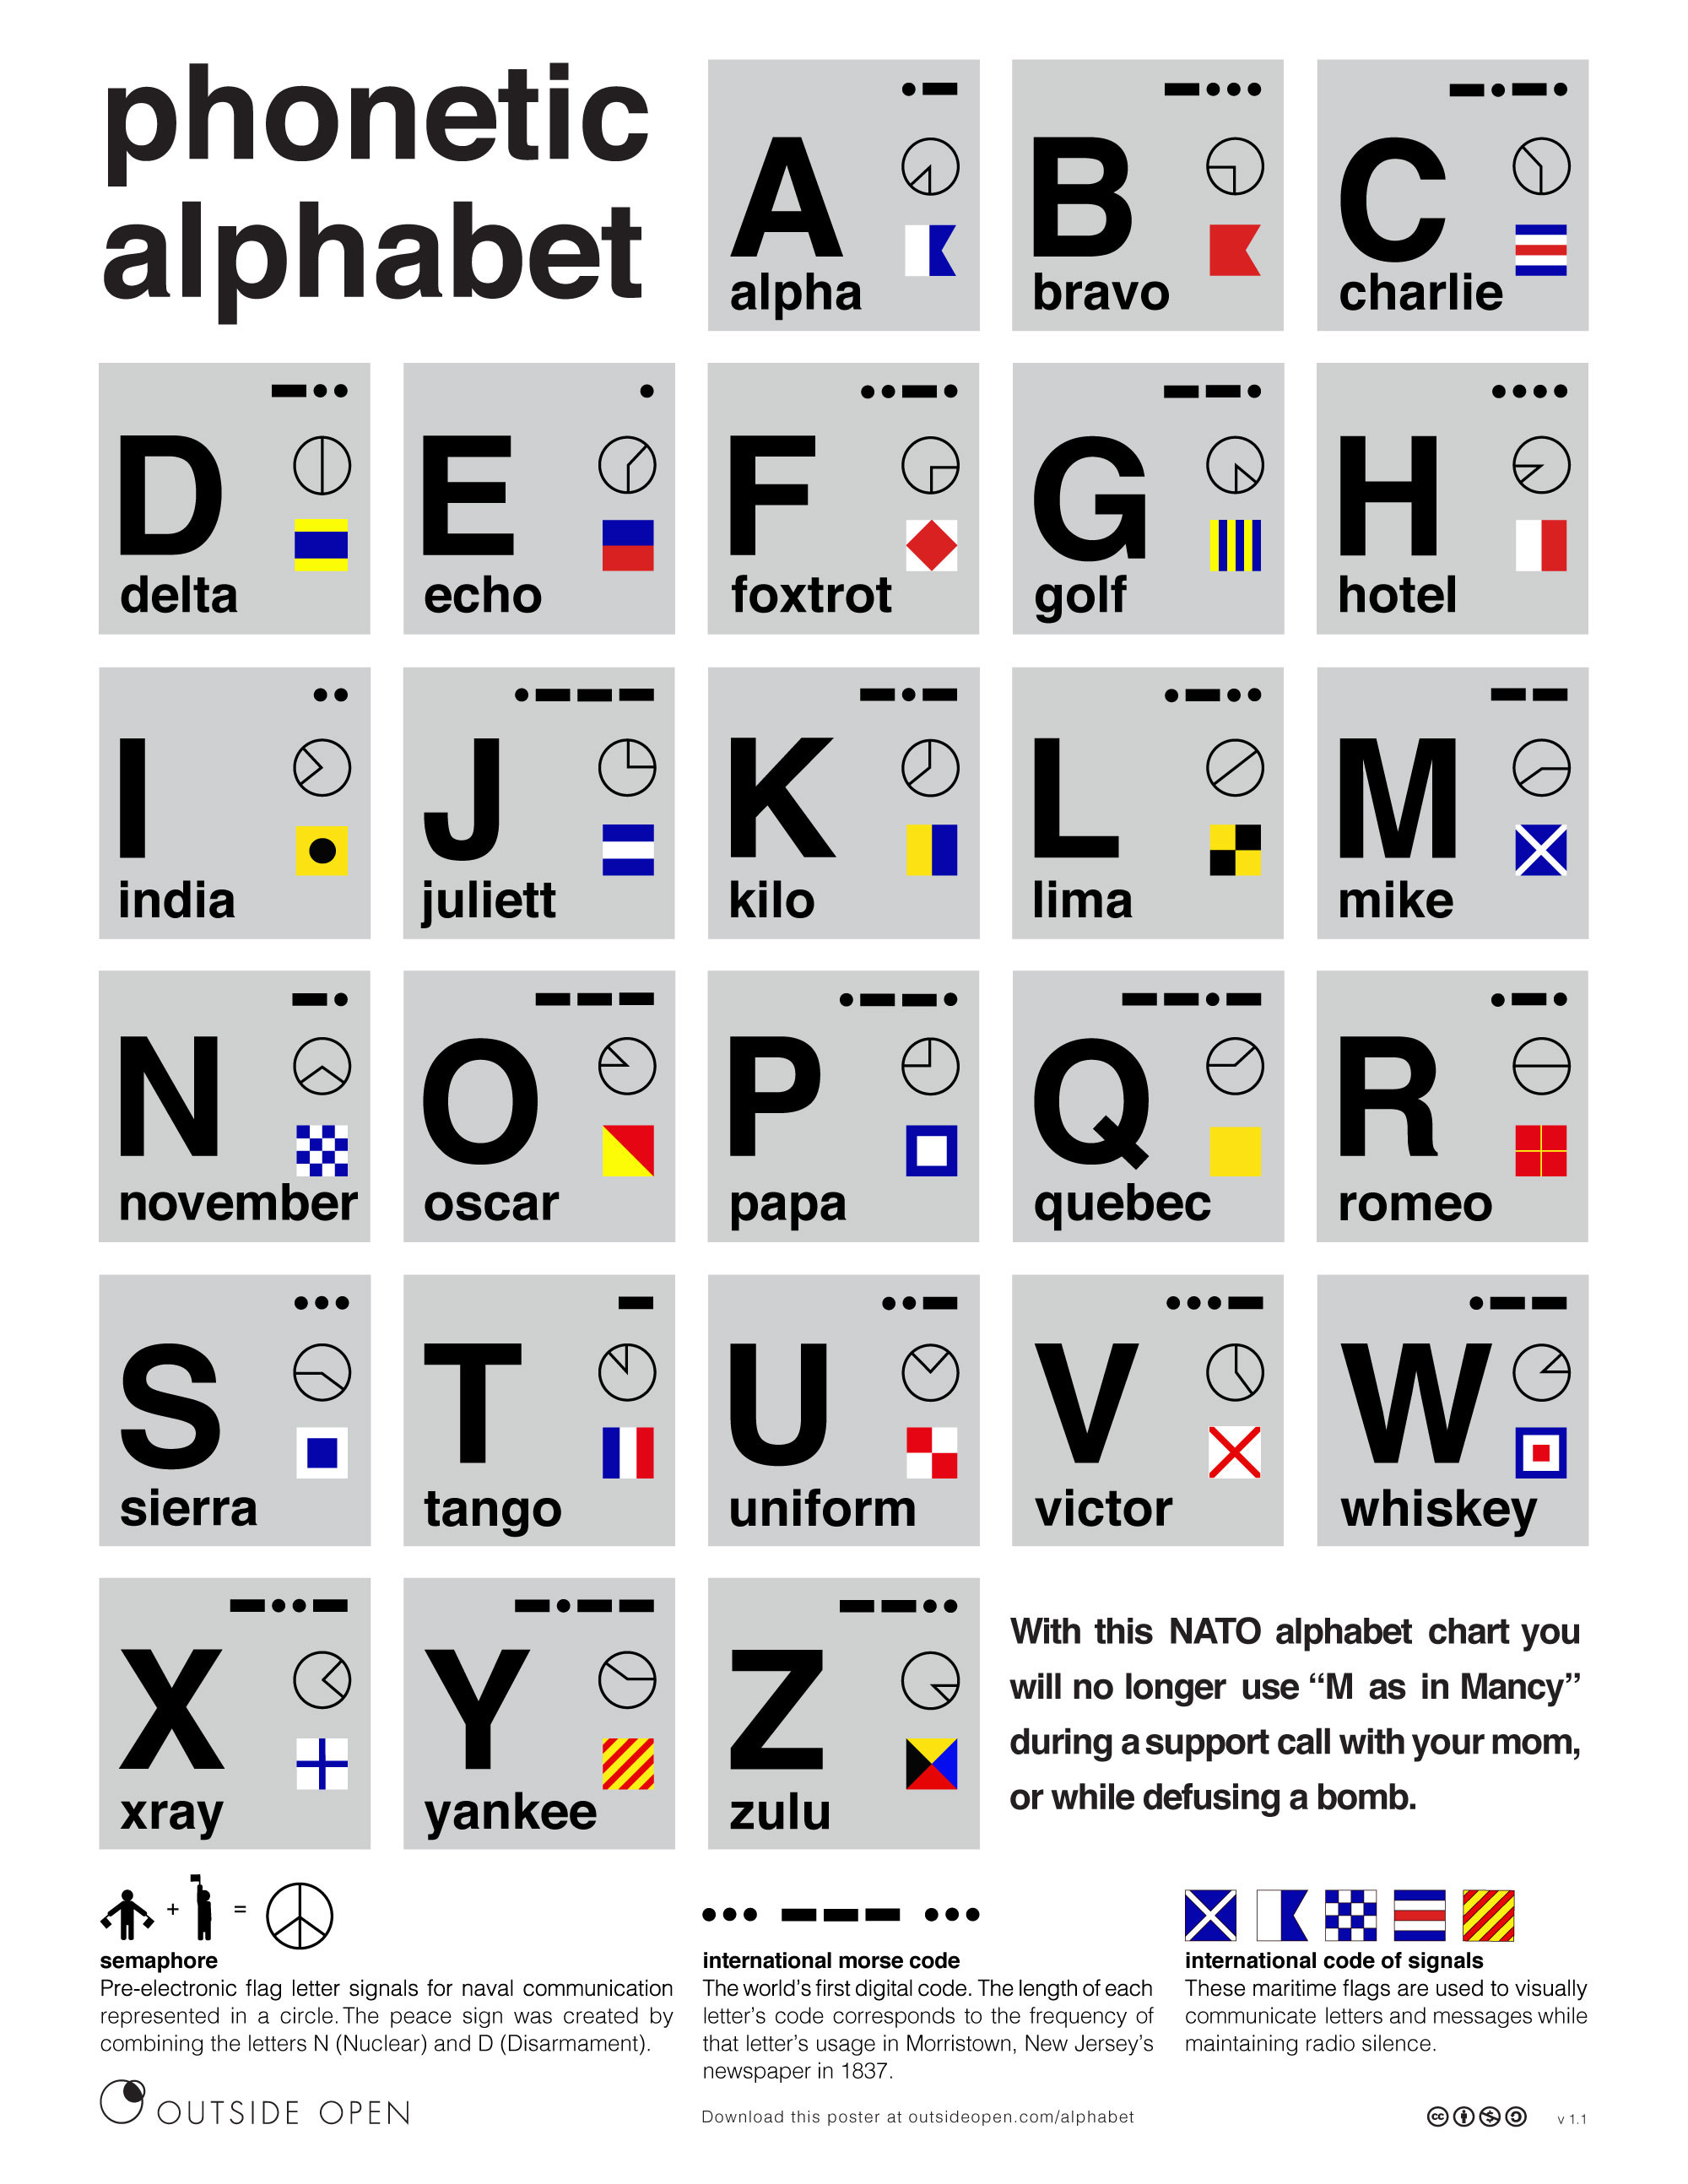 2000x2588 Europe NATO Phonetic Alphabet Children Education Classic Vintage Decorative  Poster DIY Wall Paper Posters Home Decor Gift